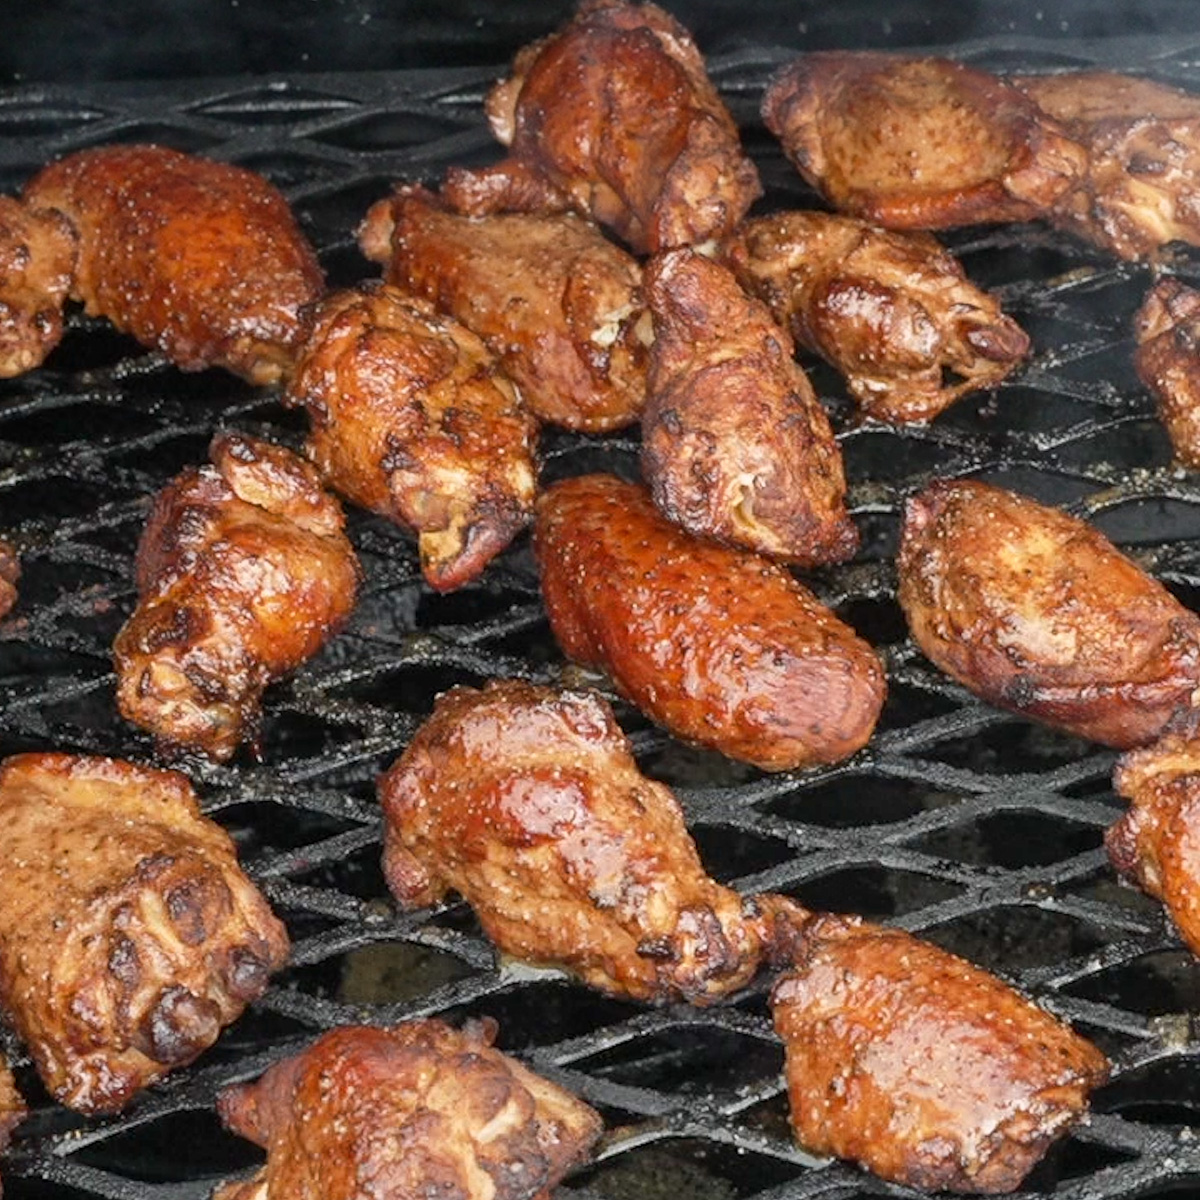 Finish the wings in a hot smoker.